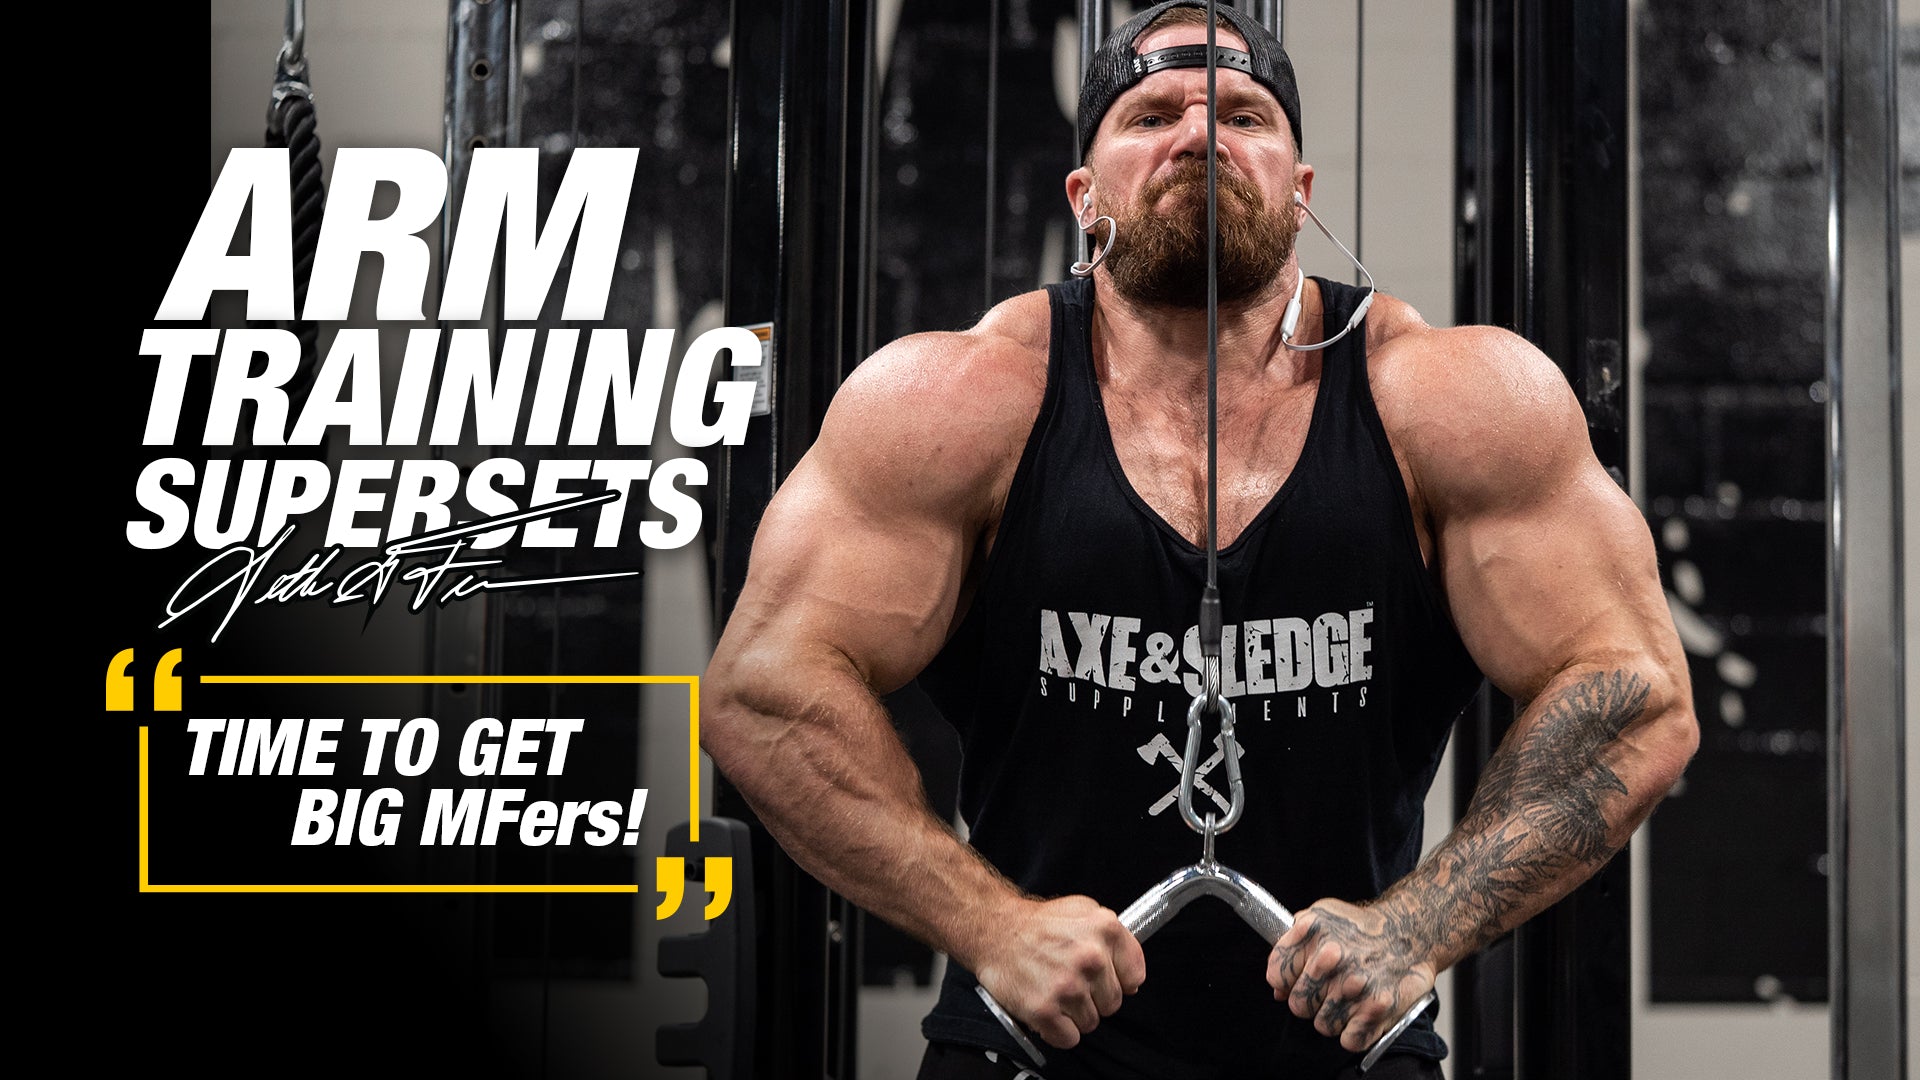 Arm Training Supersets